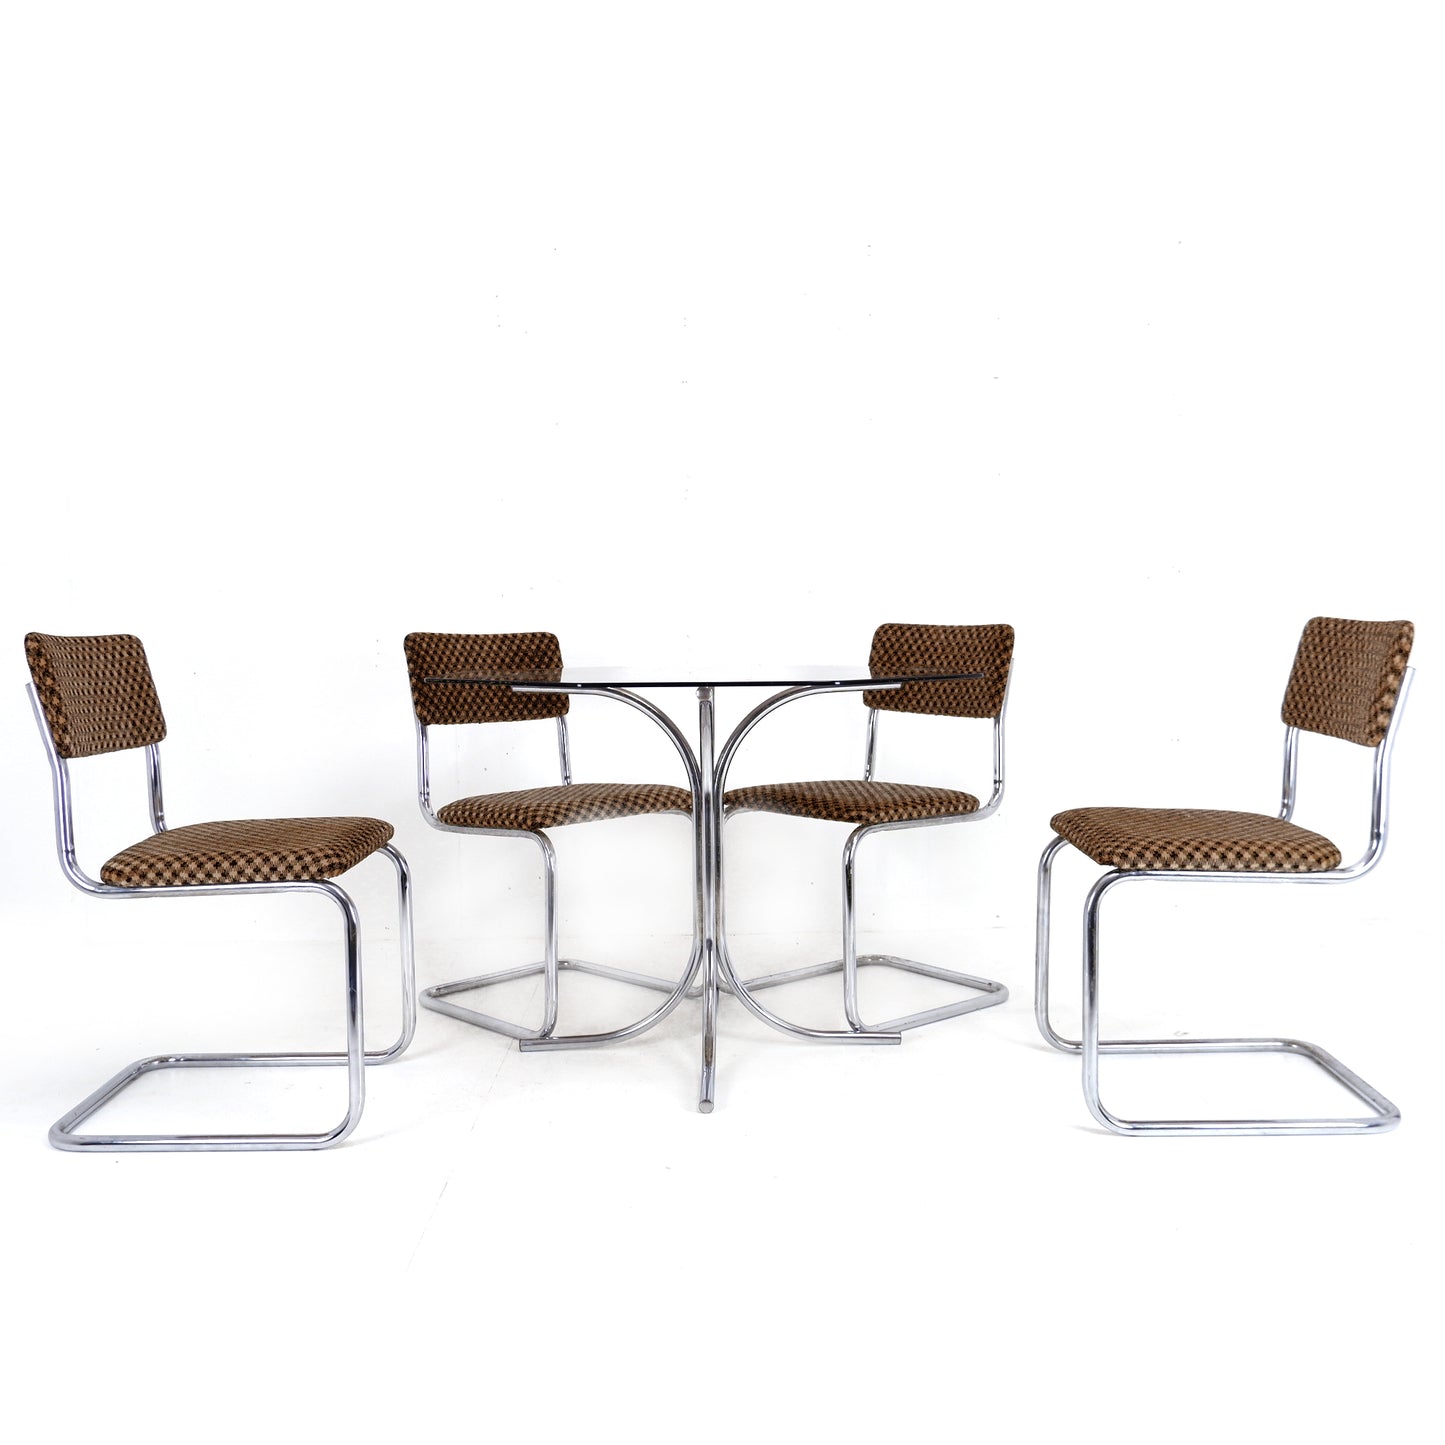 Set 4 Mid Century Cesca Style Cantilever Dining Chairs & Smoked Glass Table - Tubular Steel